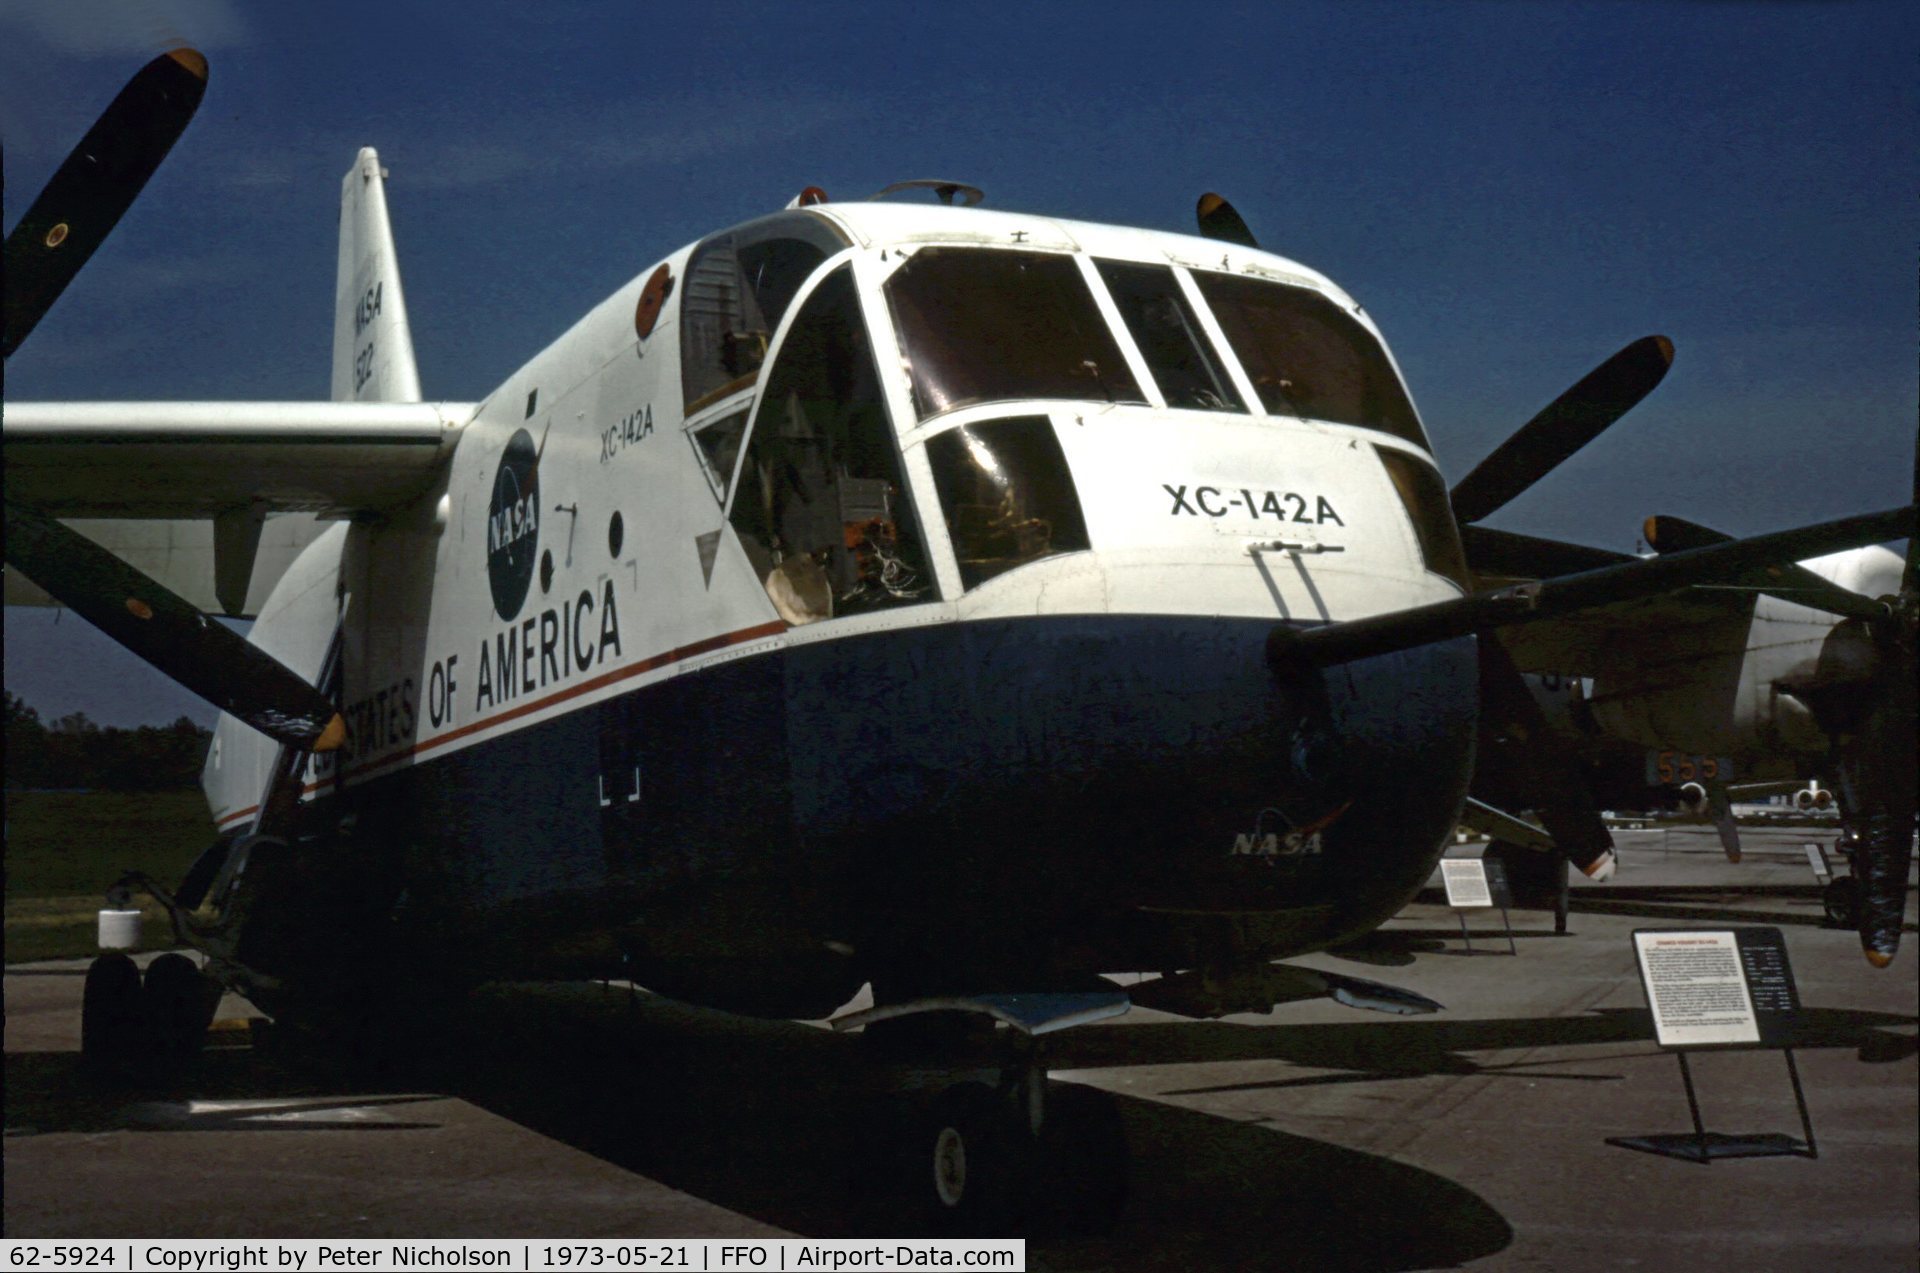 62-5924, 1964 LTV/Hiller/Ryan XC-142A C/N 4, As displayed in the summer of 1973.